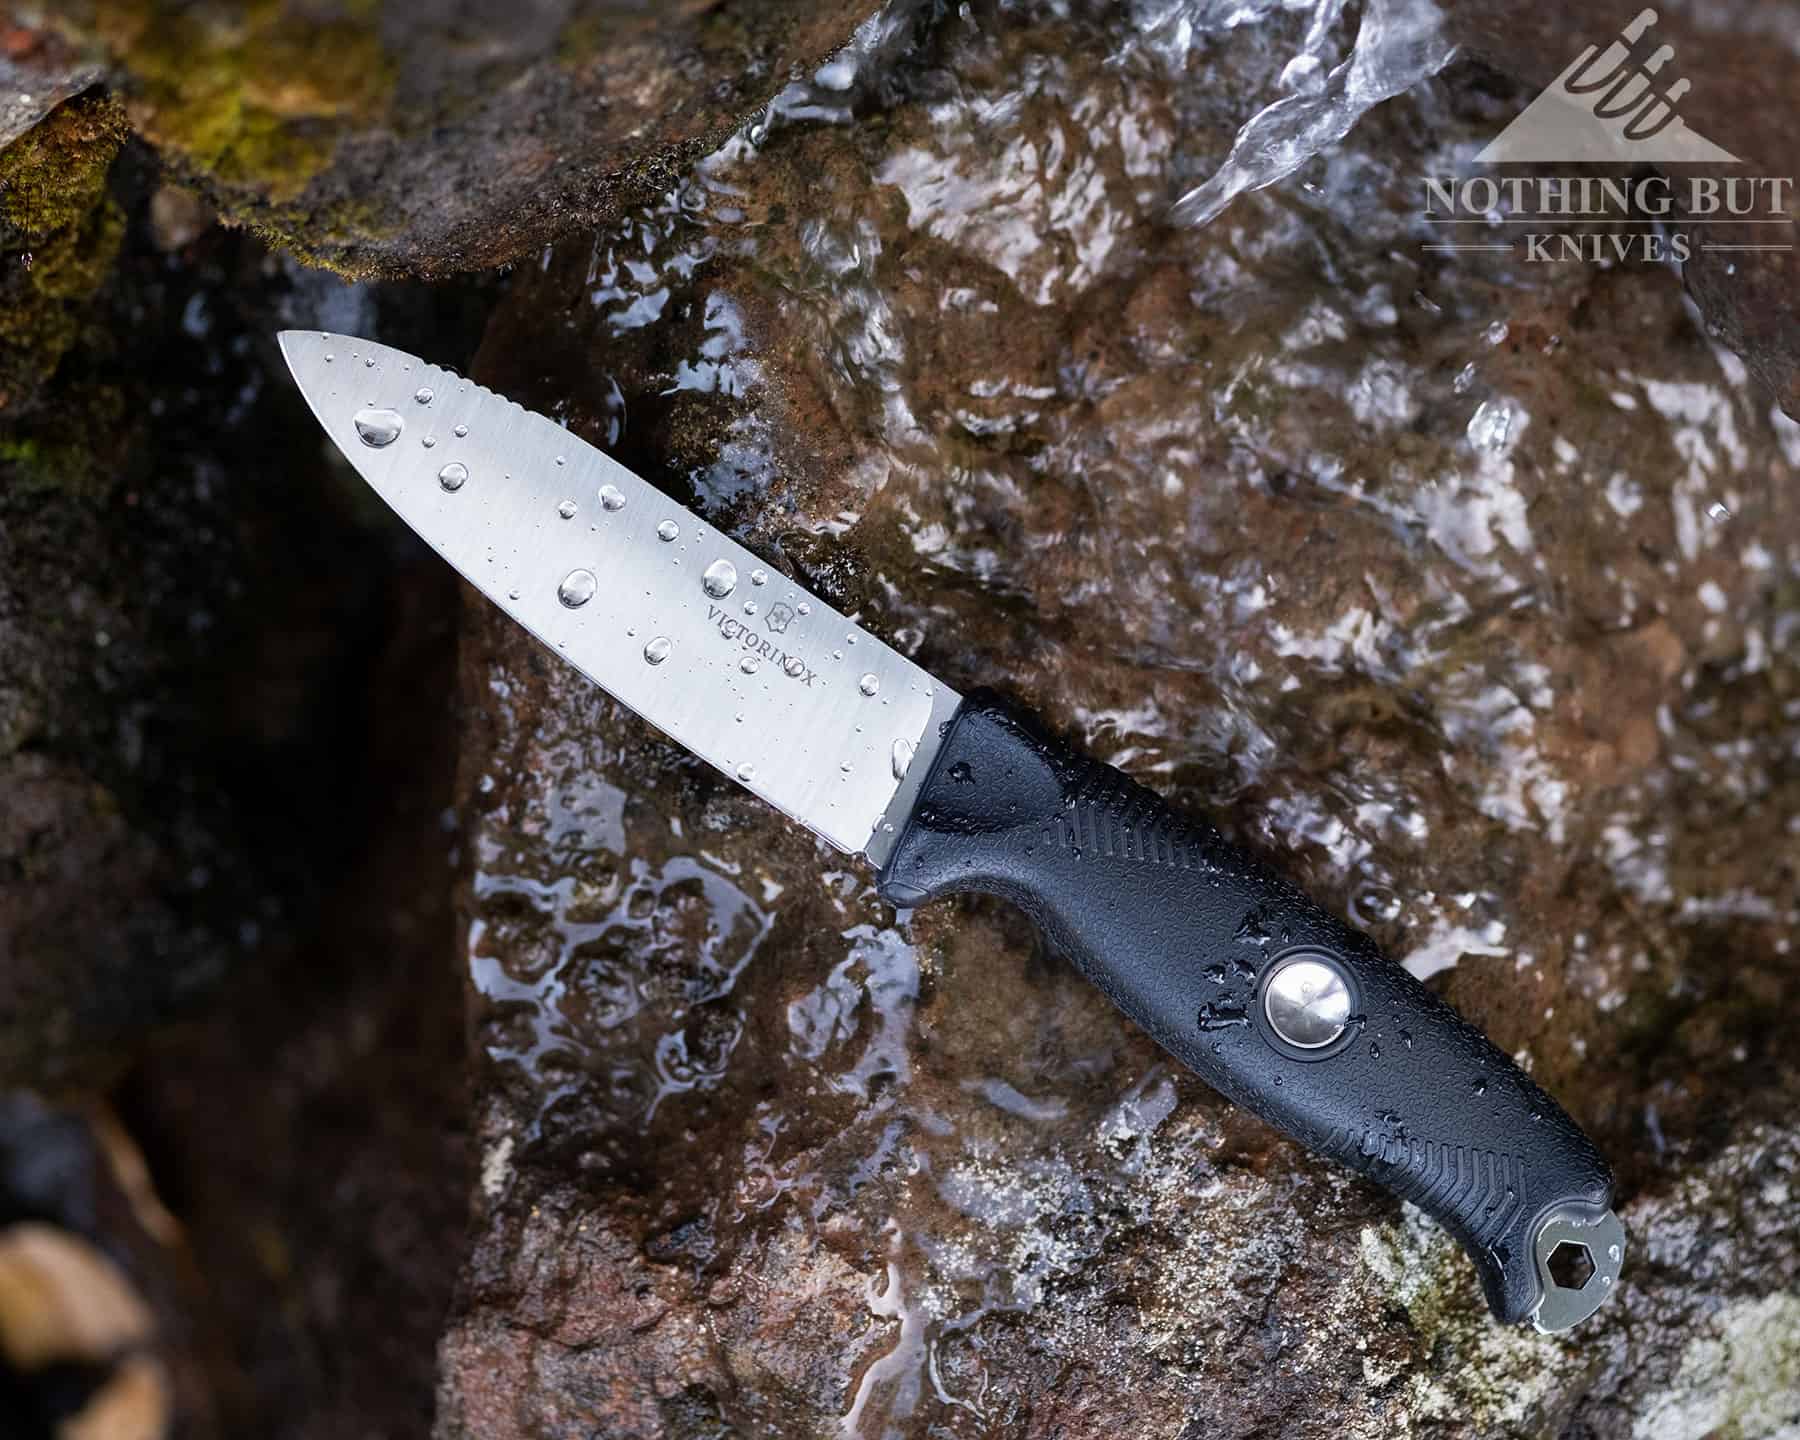 The Victorinox Venture is a great choice for wet environments. 